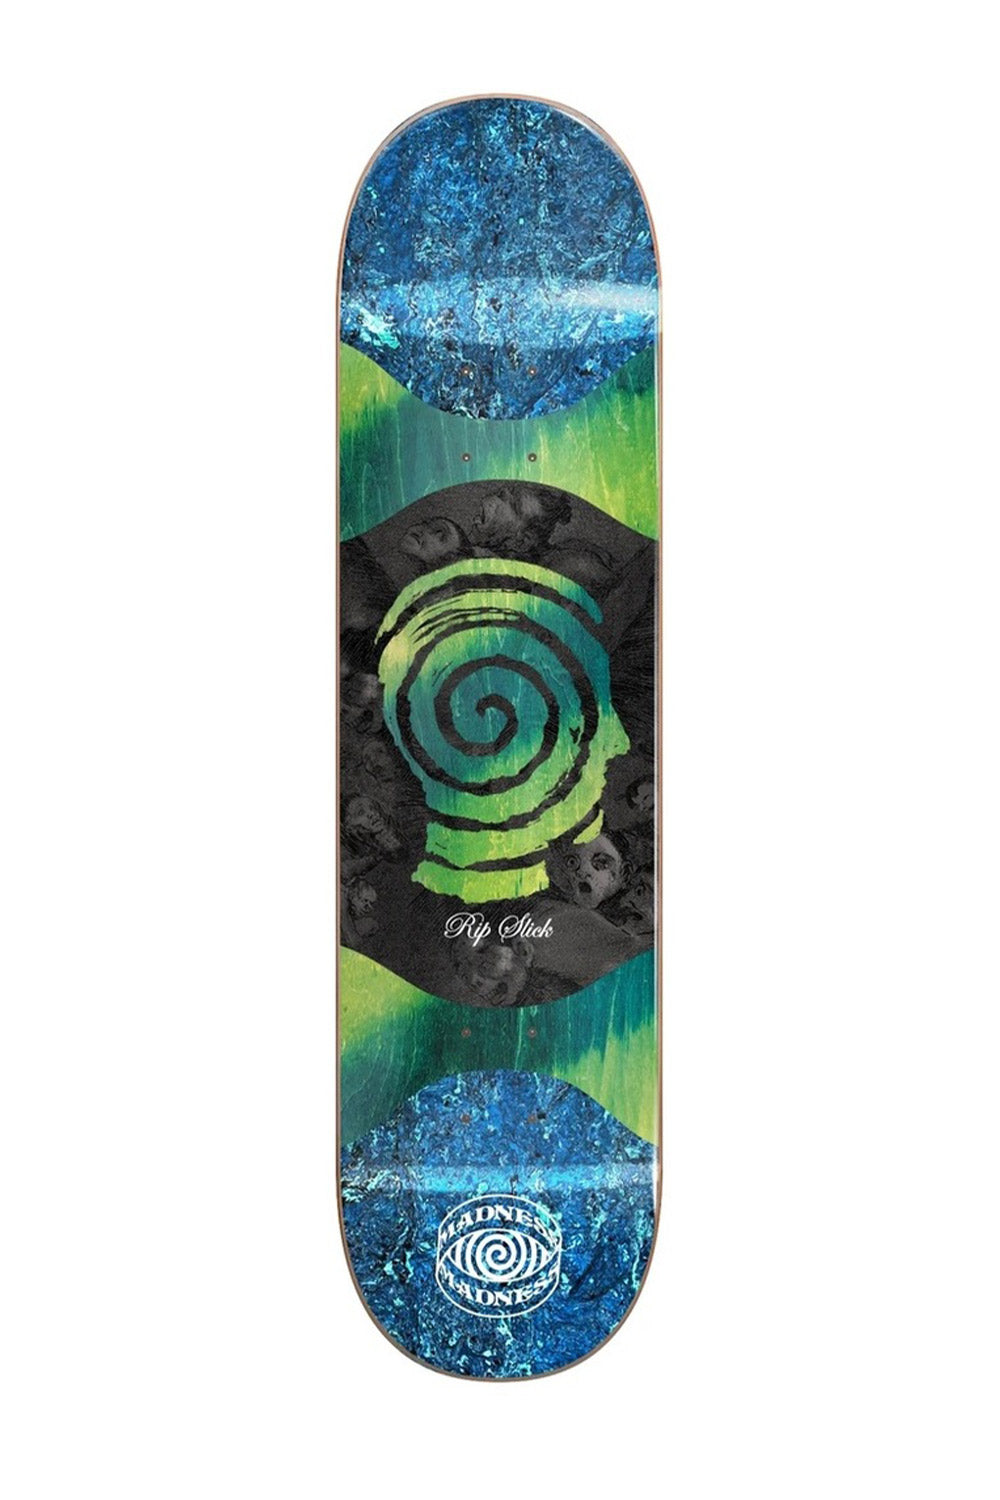 Madness Voices Slick R7 Skateboard Deck - 8.125"